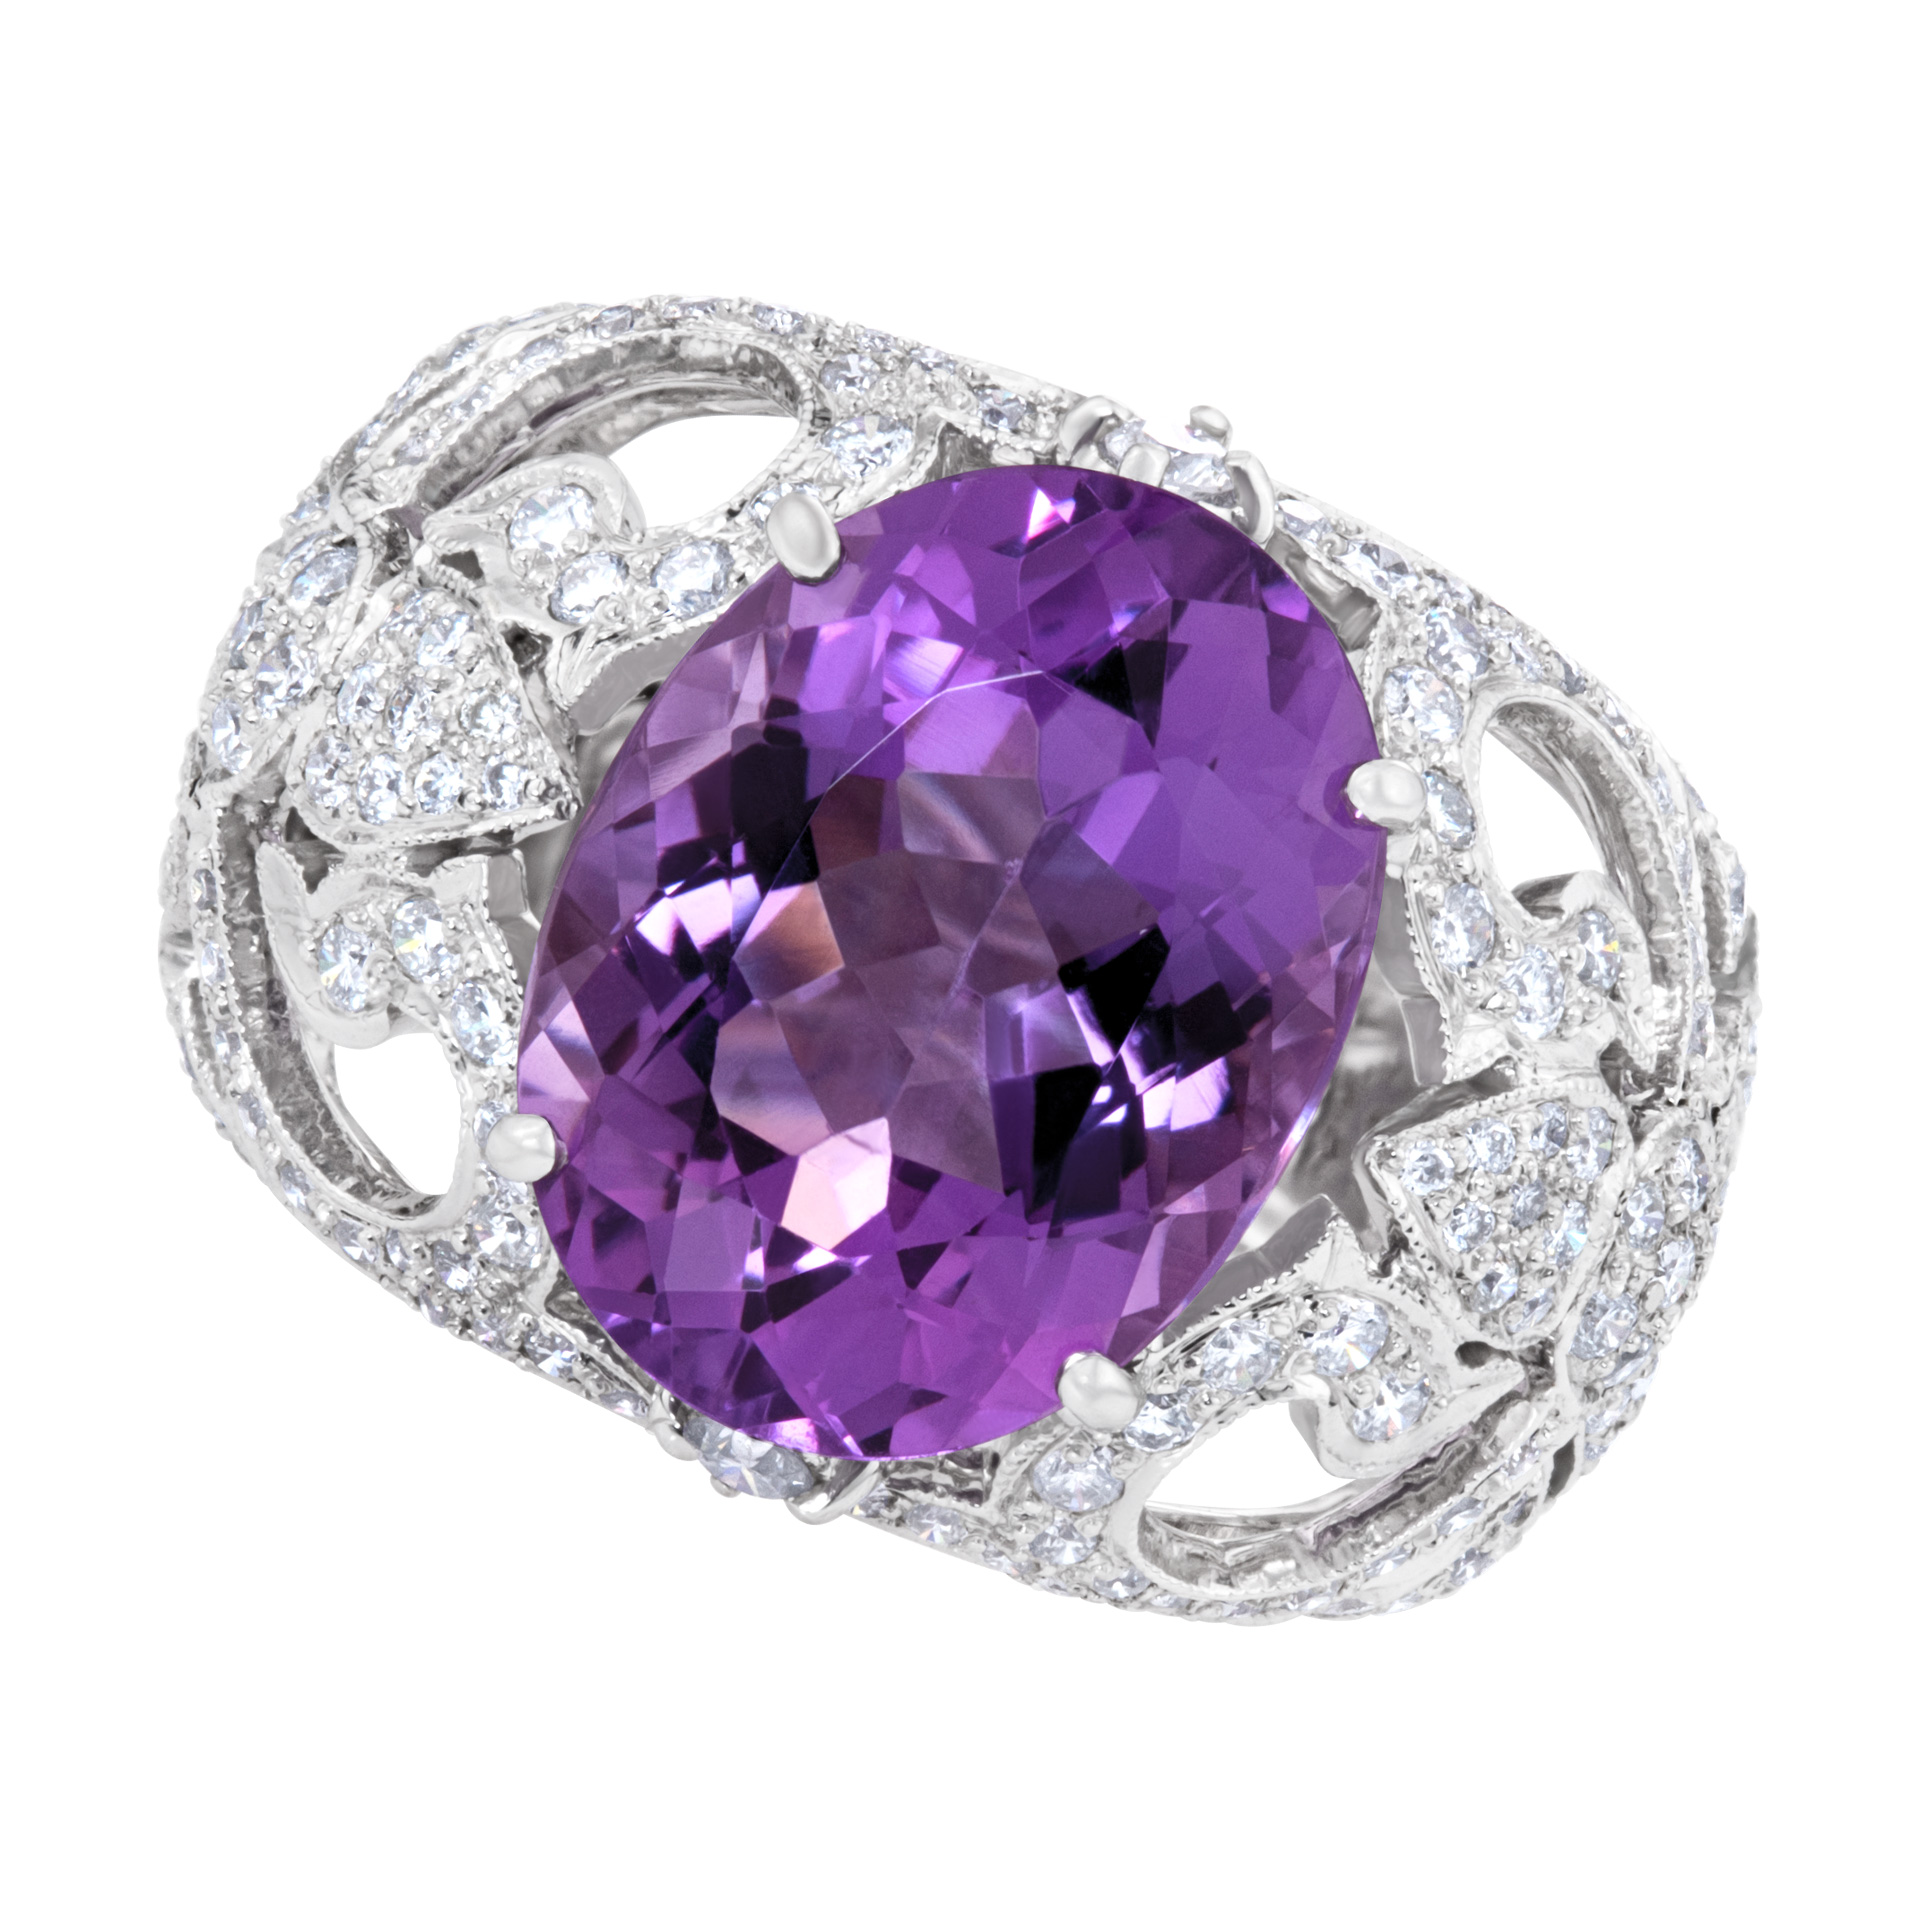 Amethyst and diamond ring set in 18k white gold